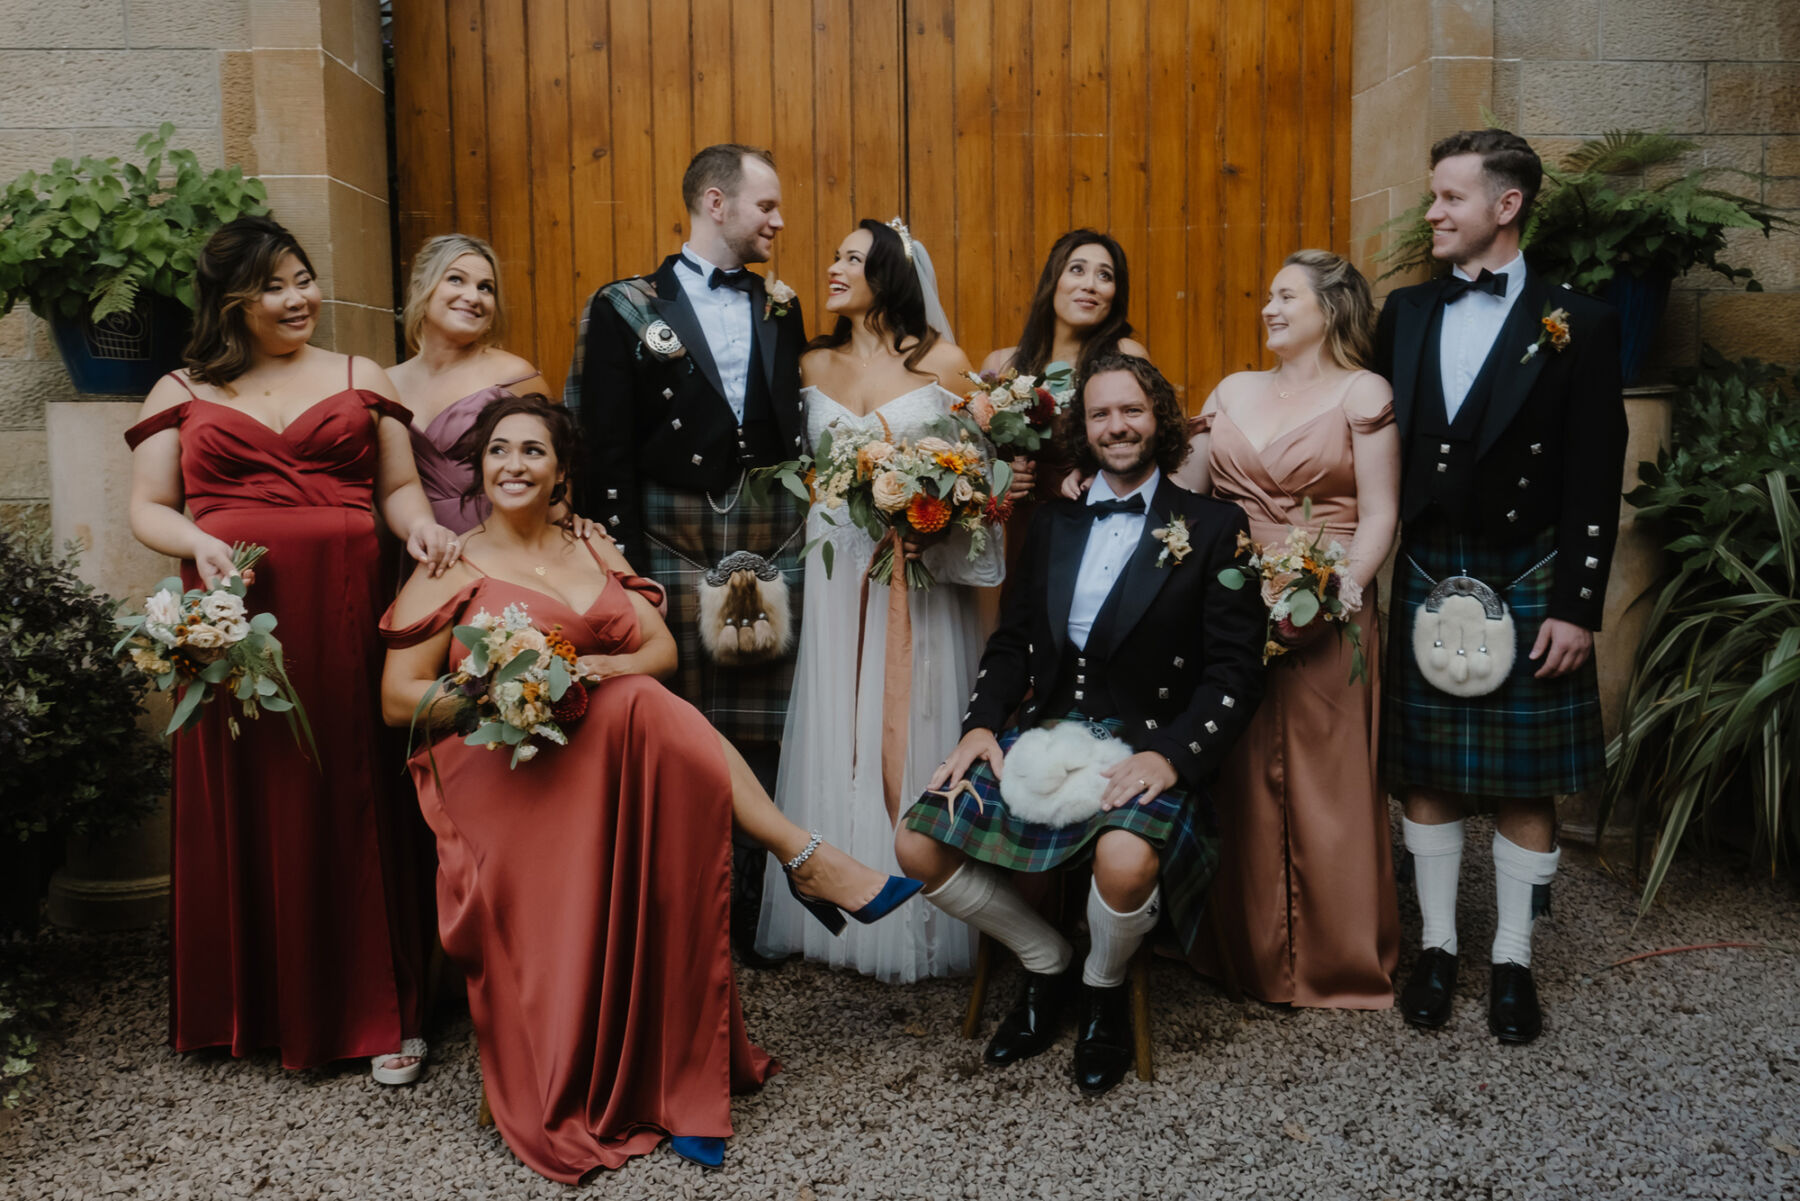 Bridal party at Cambo Estate Scotland. Groom & groomsmen in kilts with blue and green tartan. Bridesmaids in Autumn shades of burnt orange, coral, red and peach. Bride wears a boho style gown by Willowby by Watters.